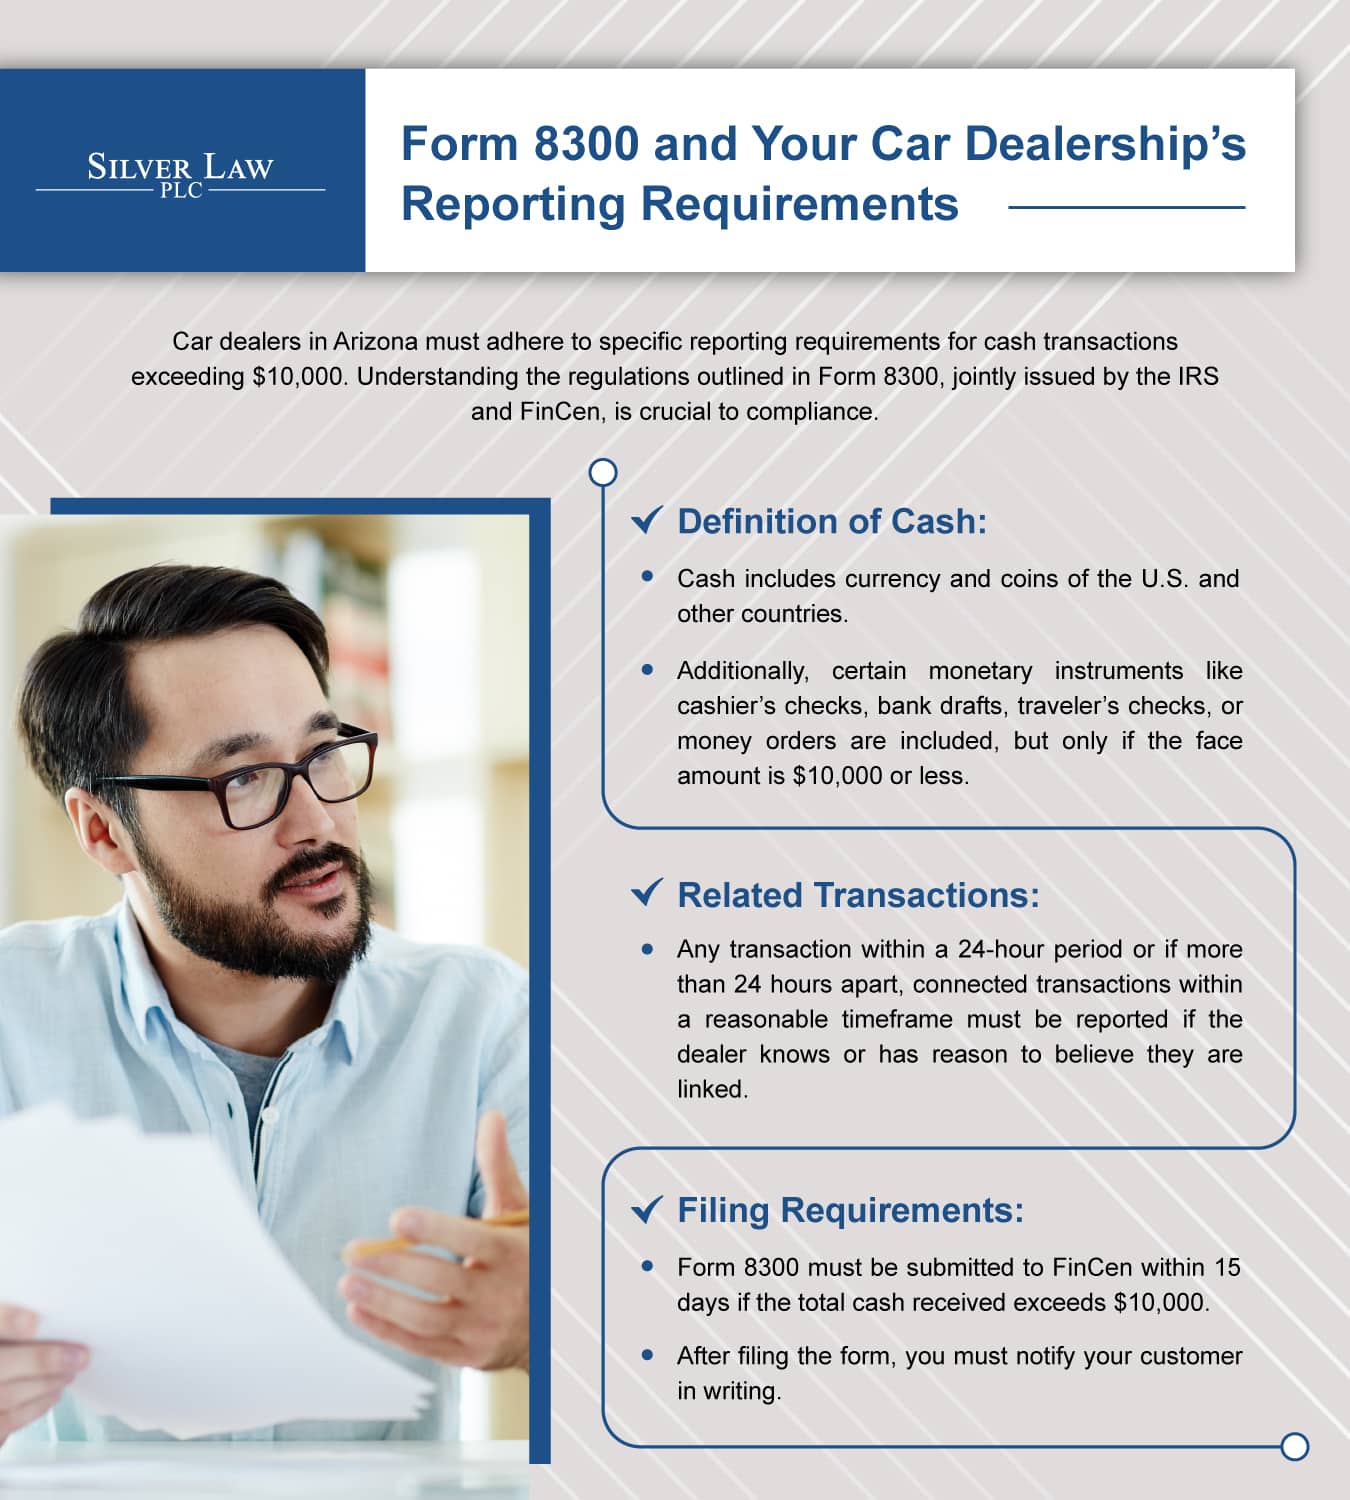 An infographic that shows car dealerships reporting requirements